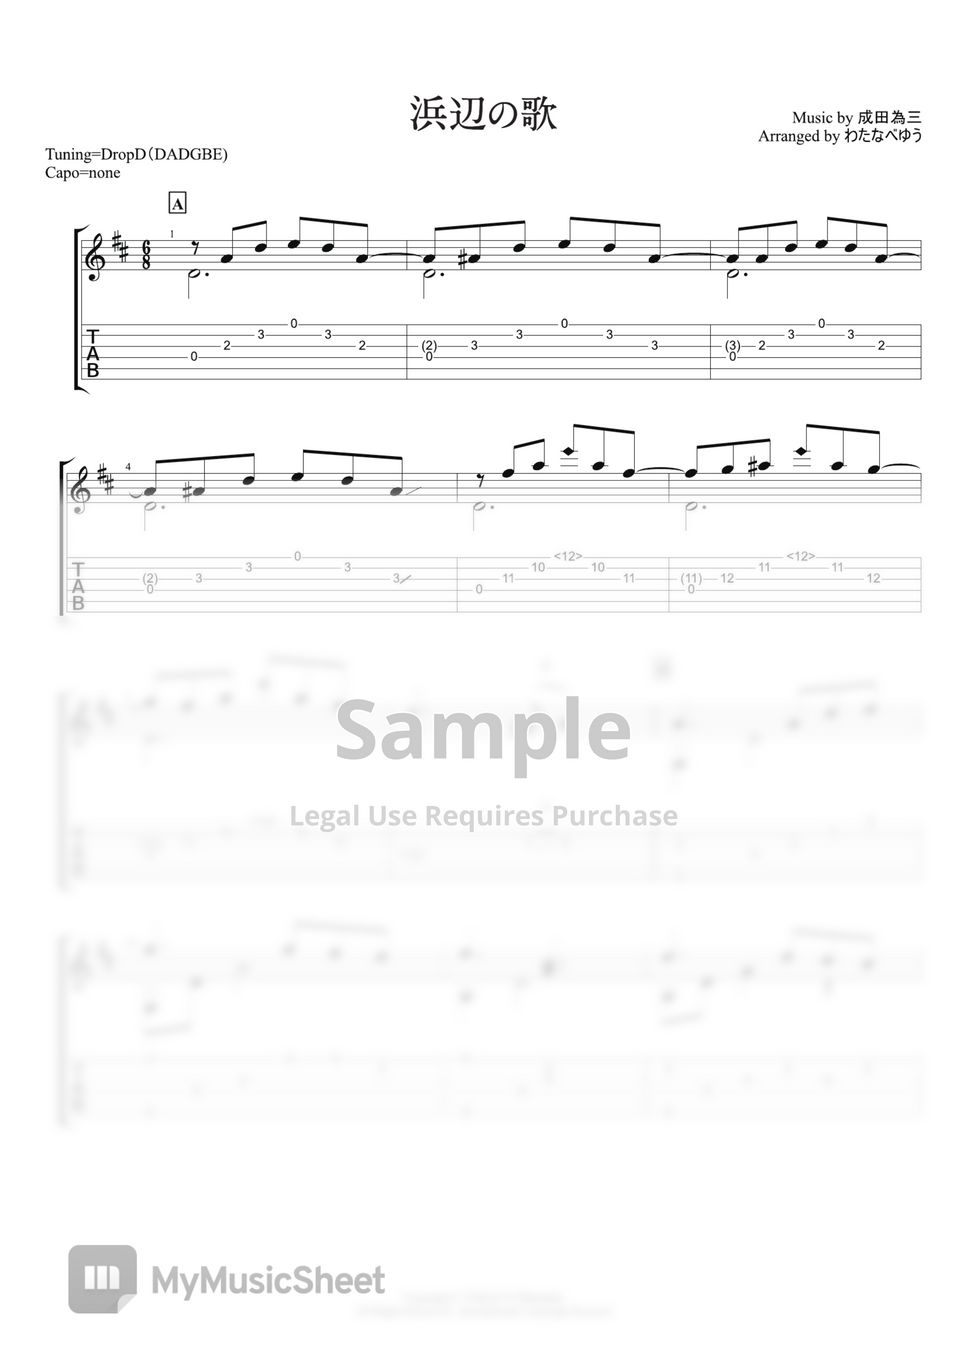 Japanese standard song - This cover3 all 13 songs TAB Score by Yu Watanabe/わたなべゆう